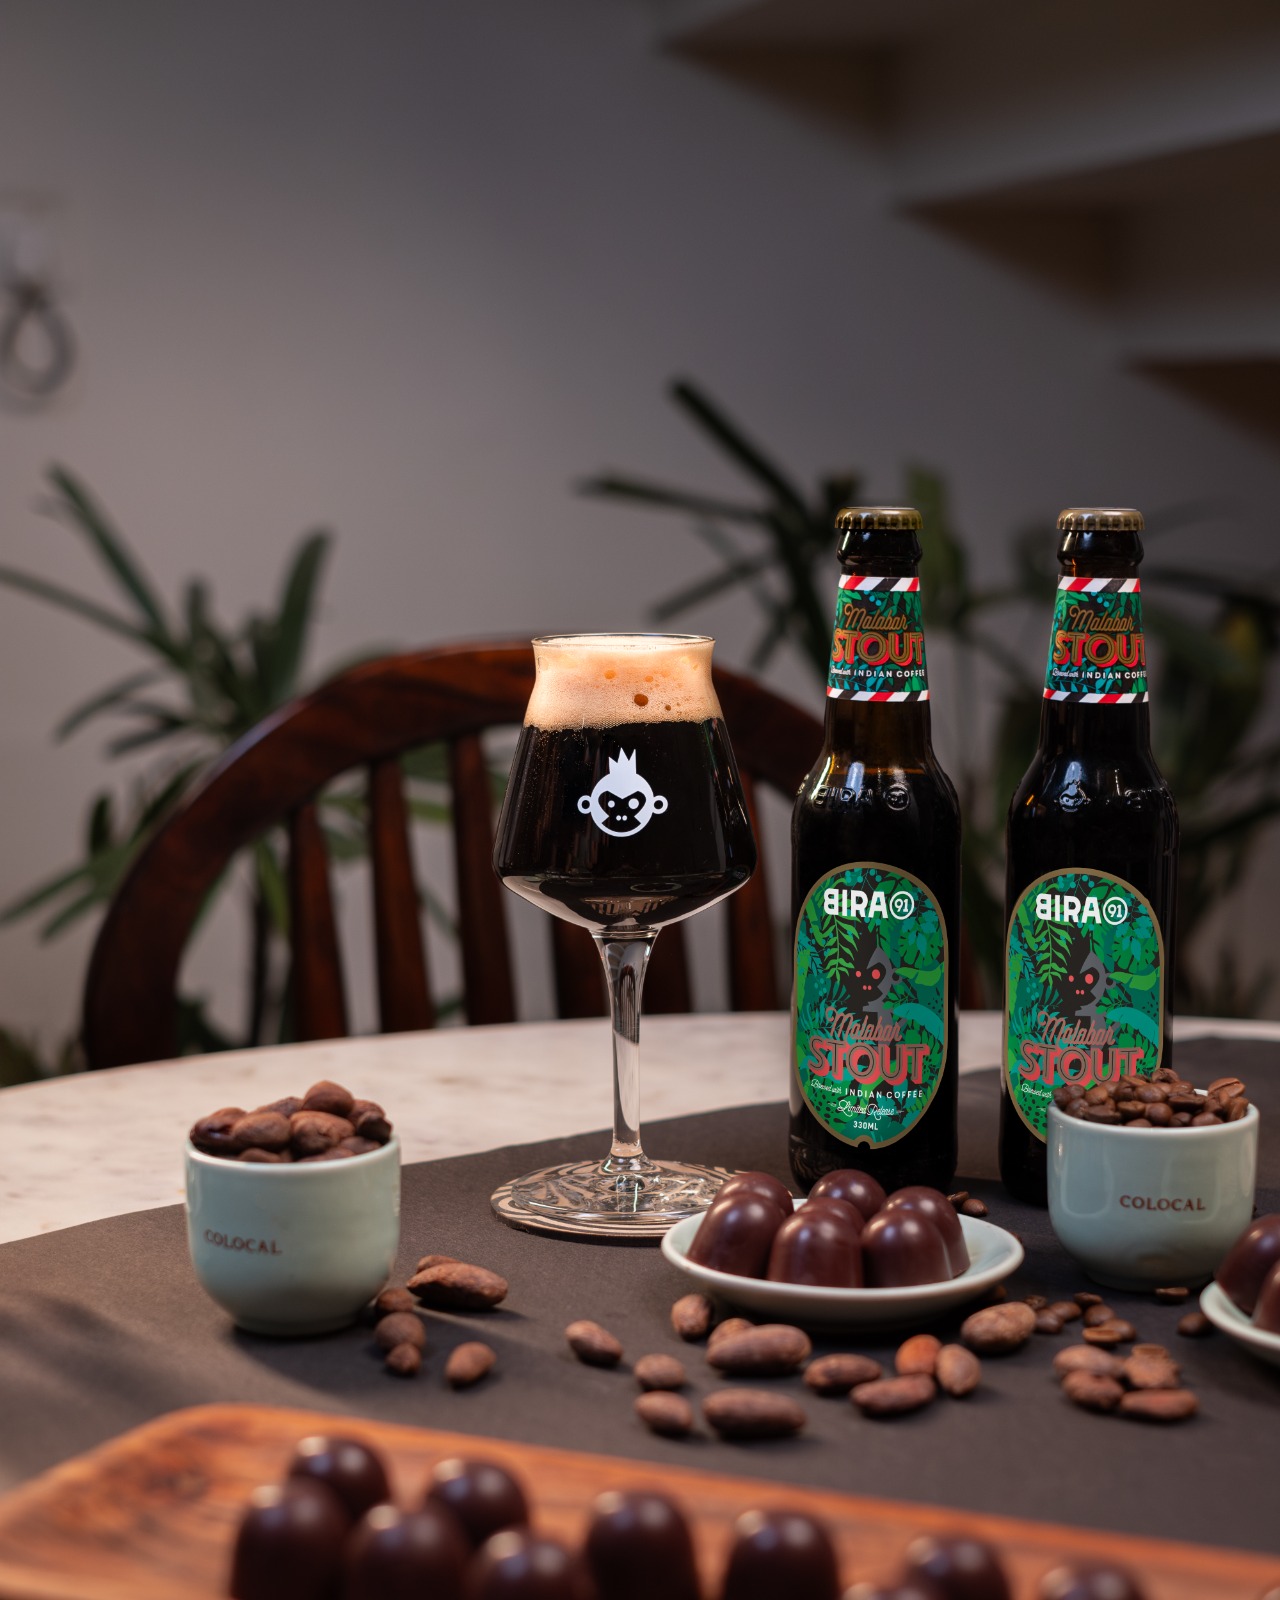 Bira 91 Taproom and Colocal Chocolates collaborate to launch limited-edition Beer Bonbons